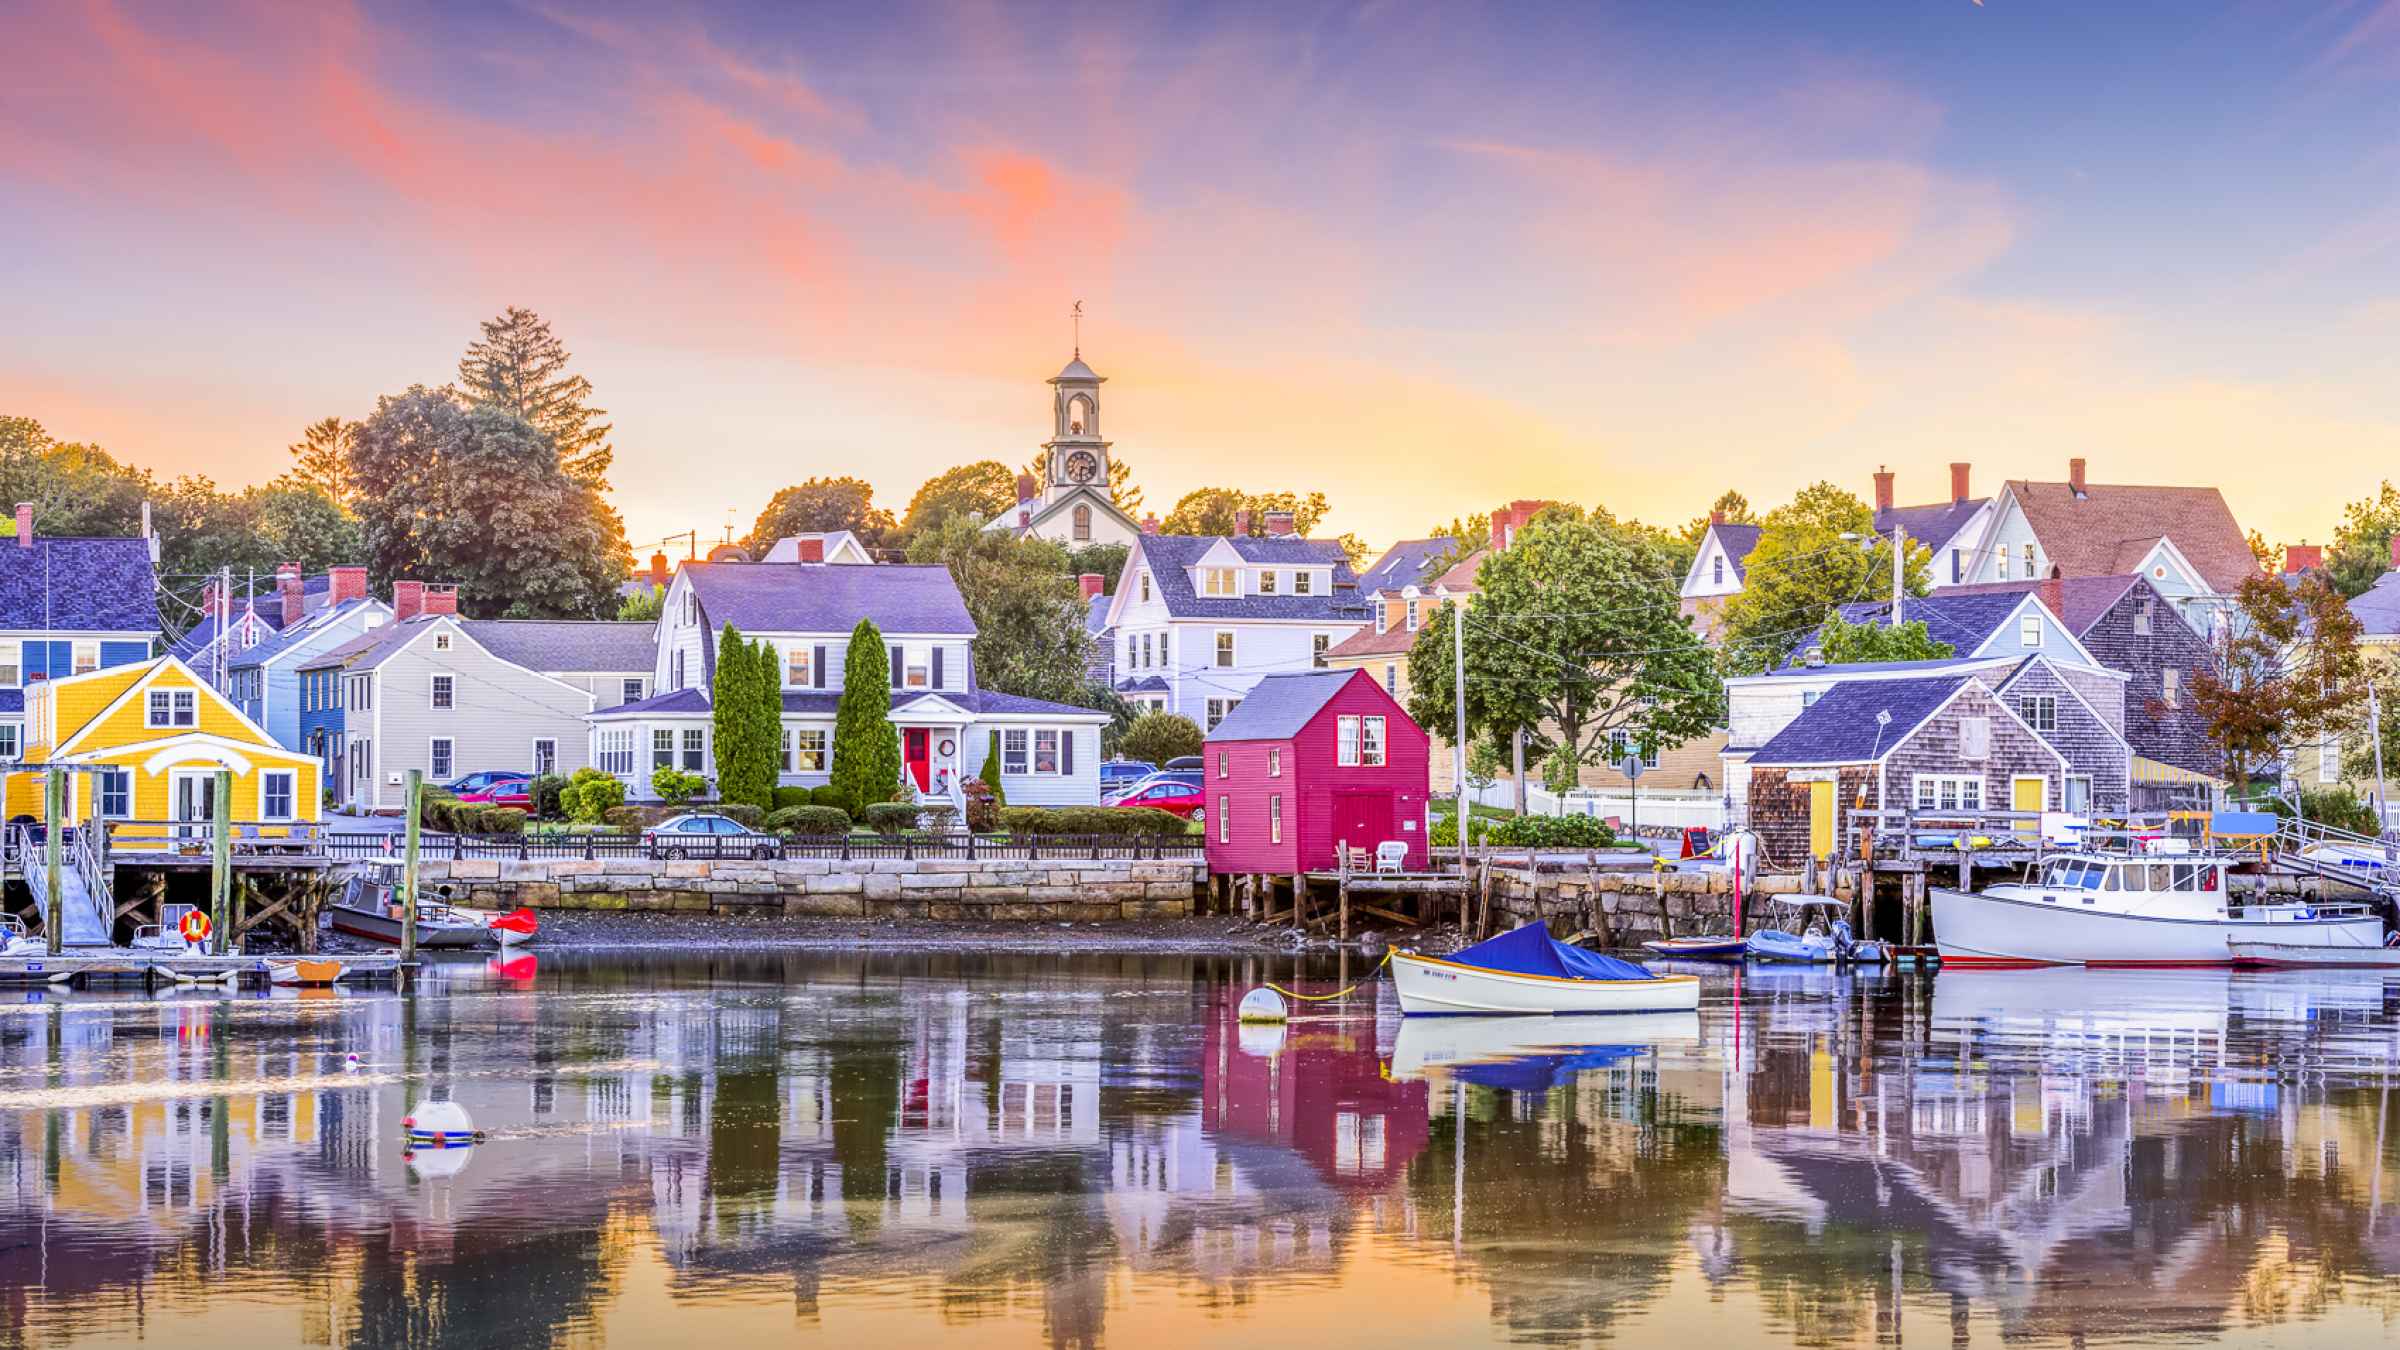 The BEST New England Tours in 2022 - FREE Cancellation